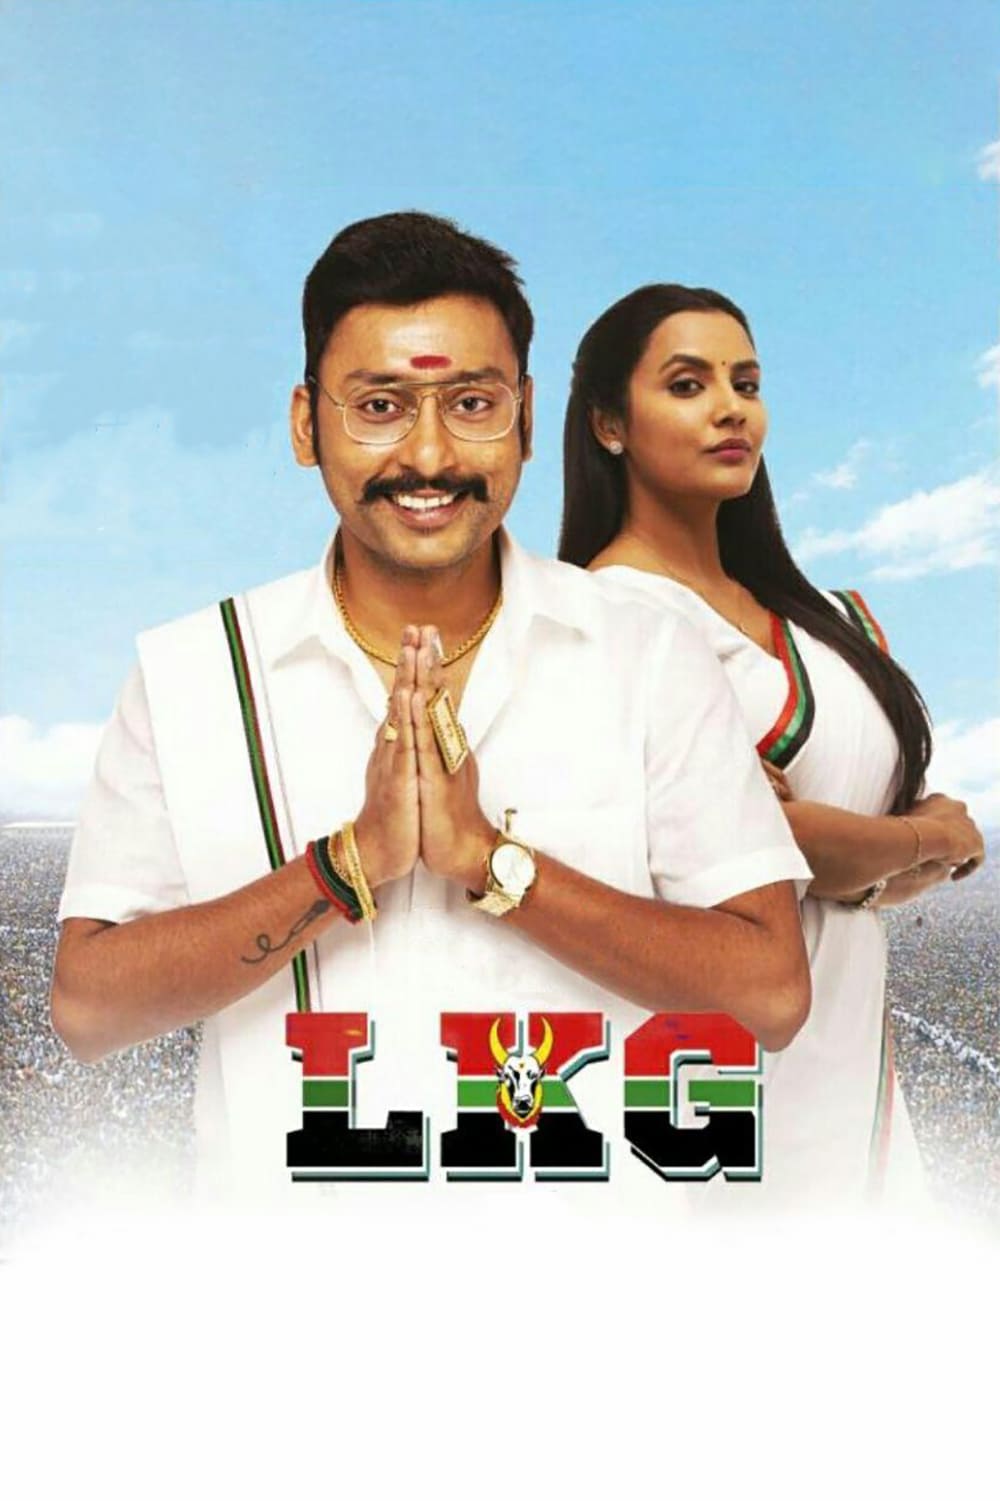 Poster for the movie "LKG"